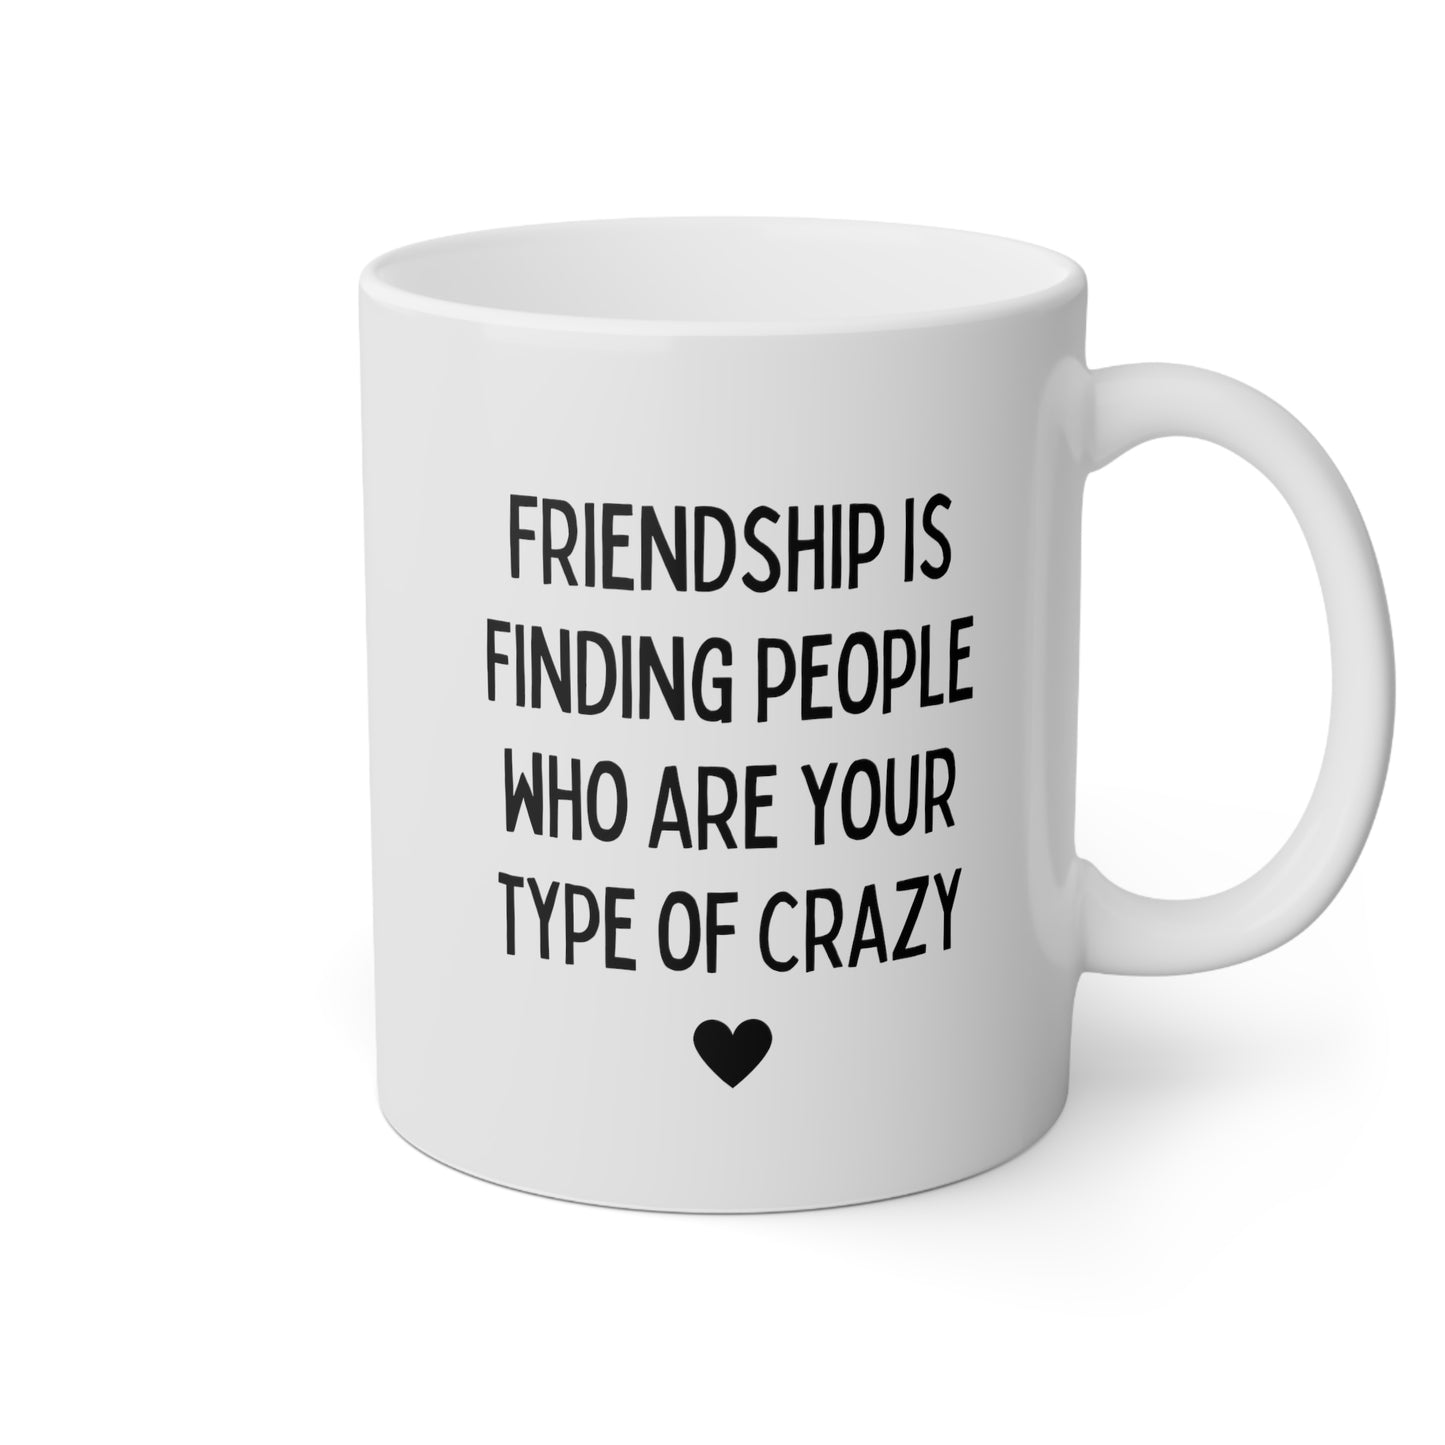 Friendship Is Finding People Who Are Your Type Of Crazy 11oz white funny large coffee mug gift for best friend friendship decor BFF Bestie tea cup waveywares wavey wares wavywares wavy wares